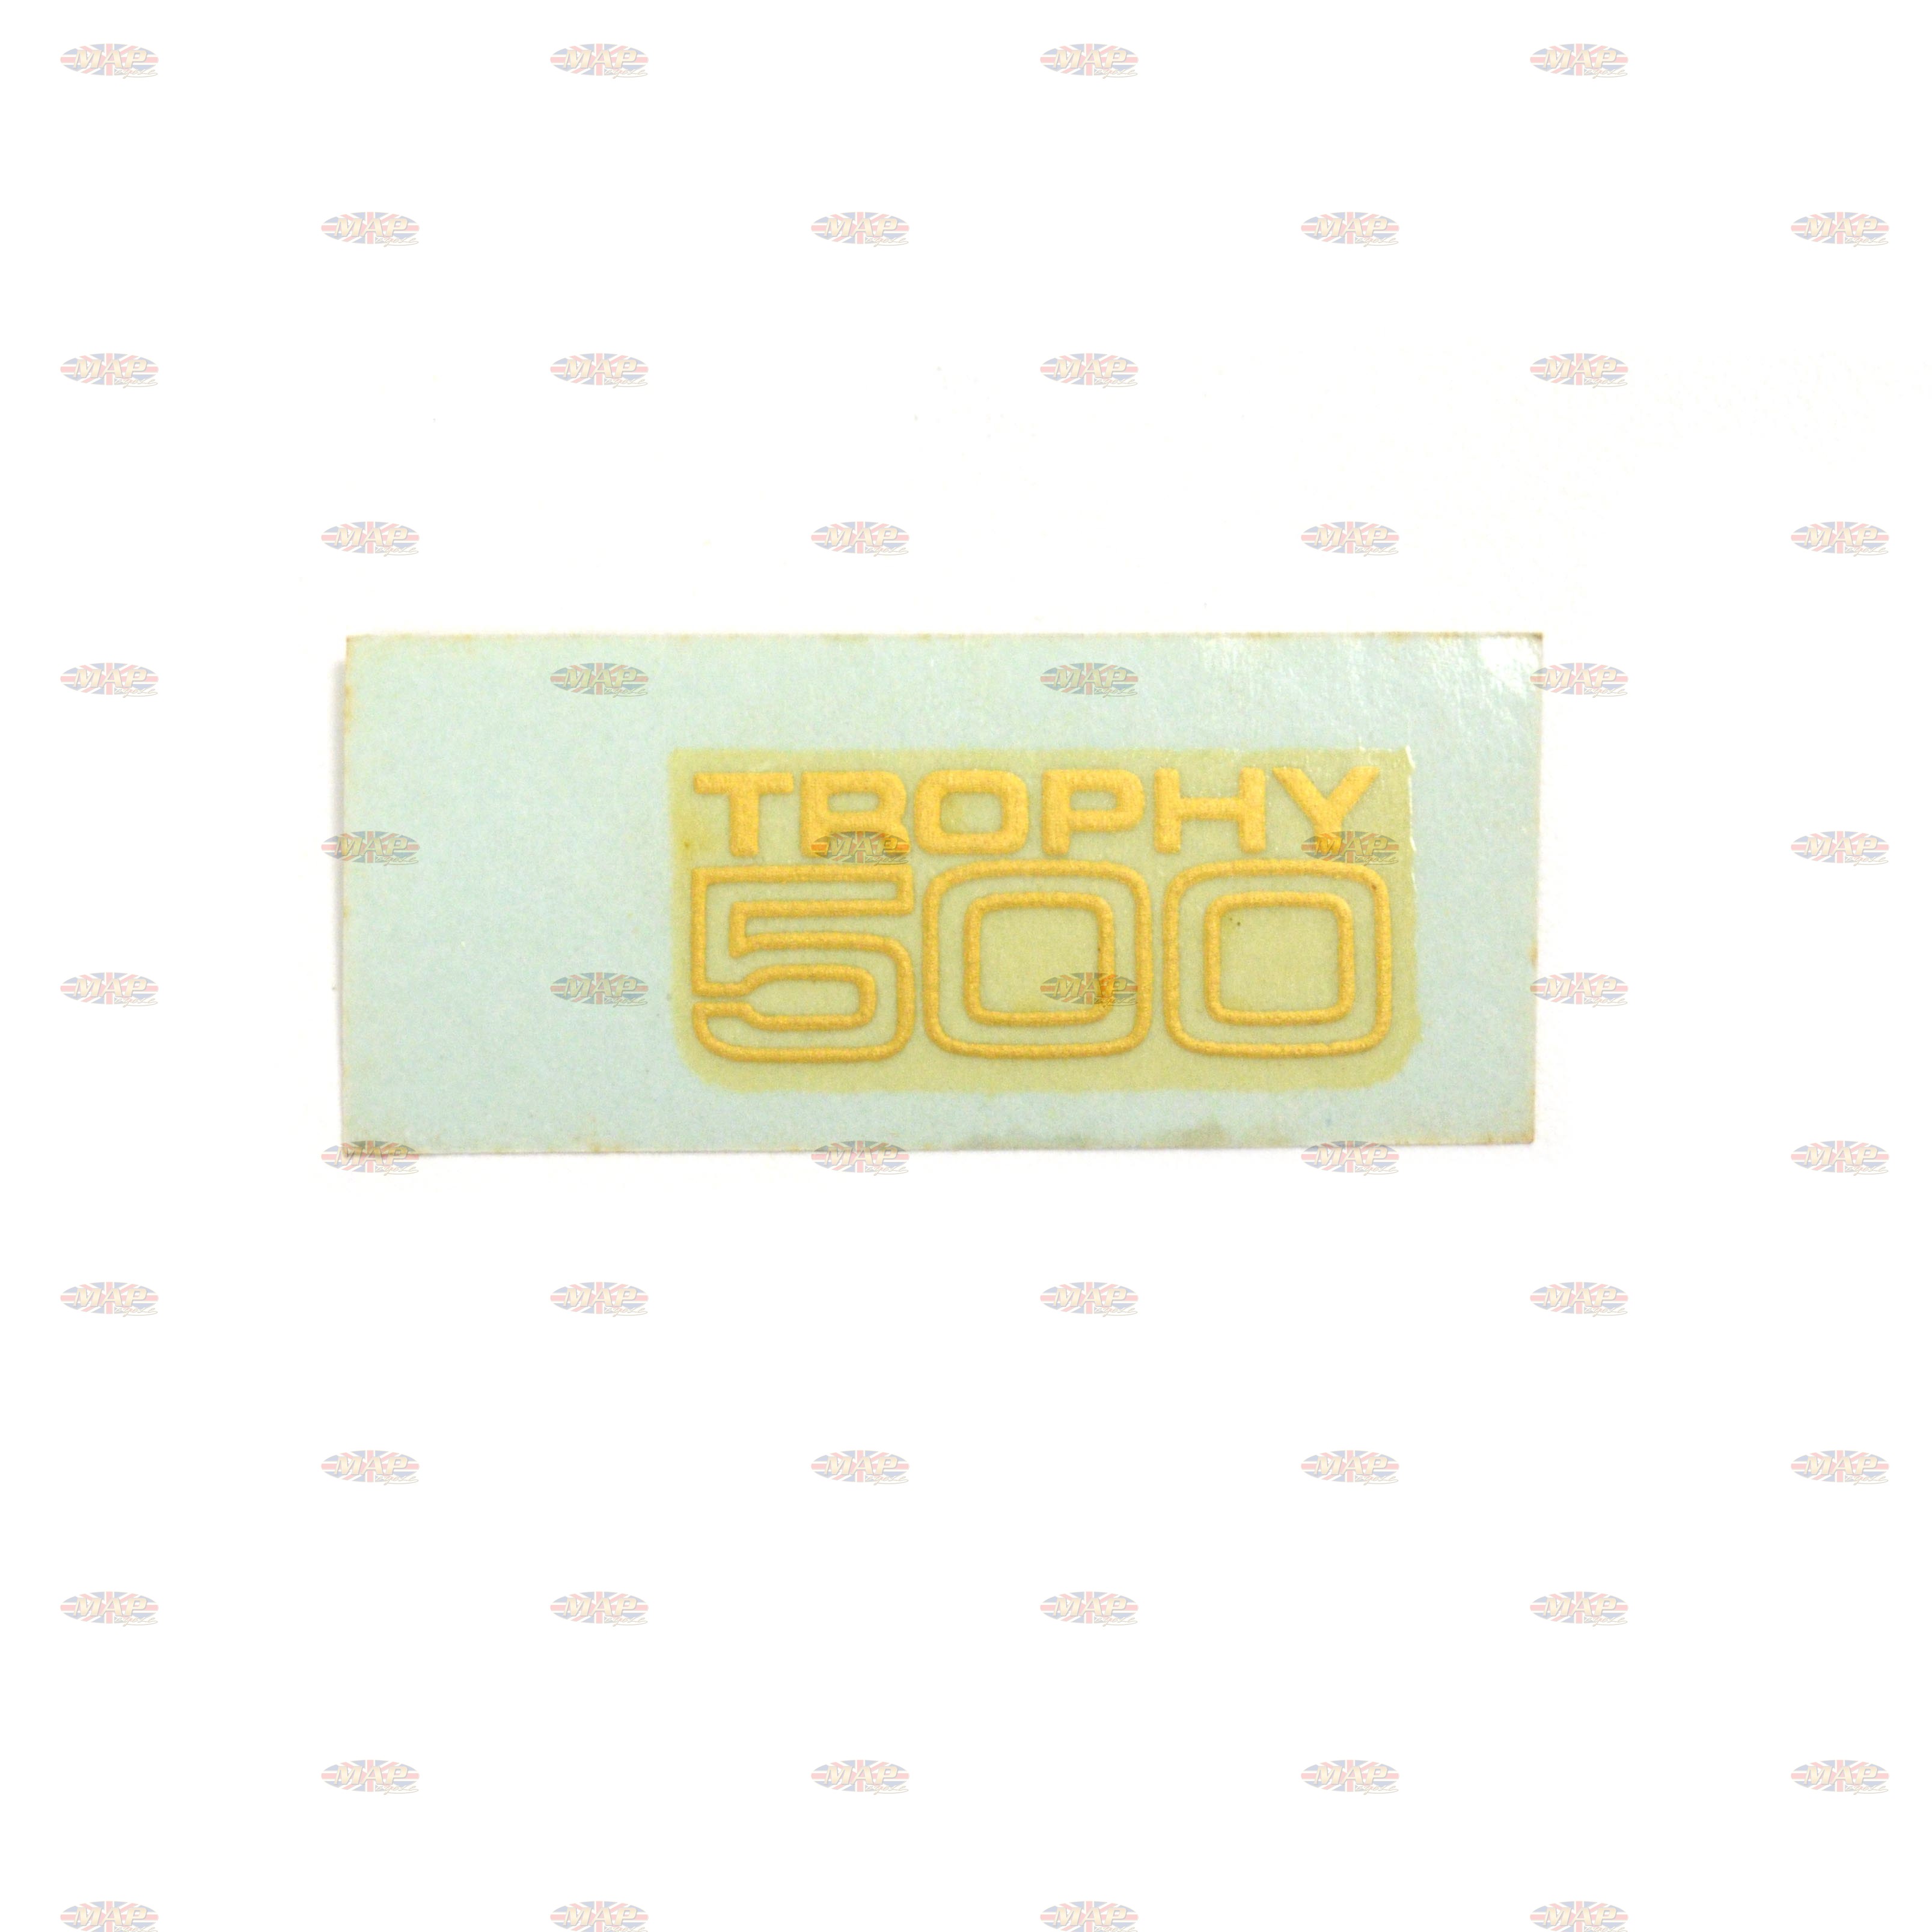 DECAL/  TROPHY 500  SMALL BLOCK 60-2064